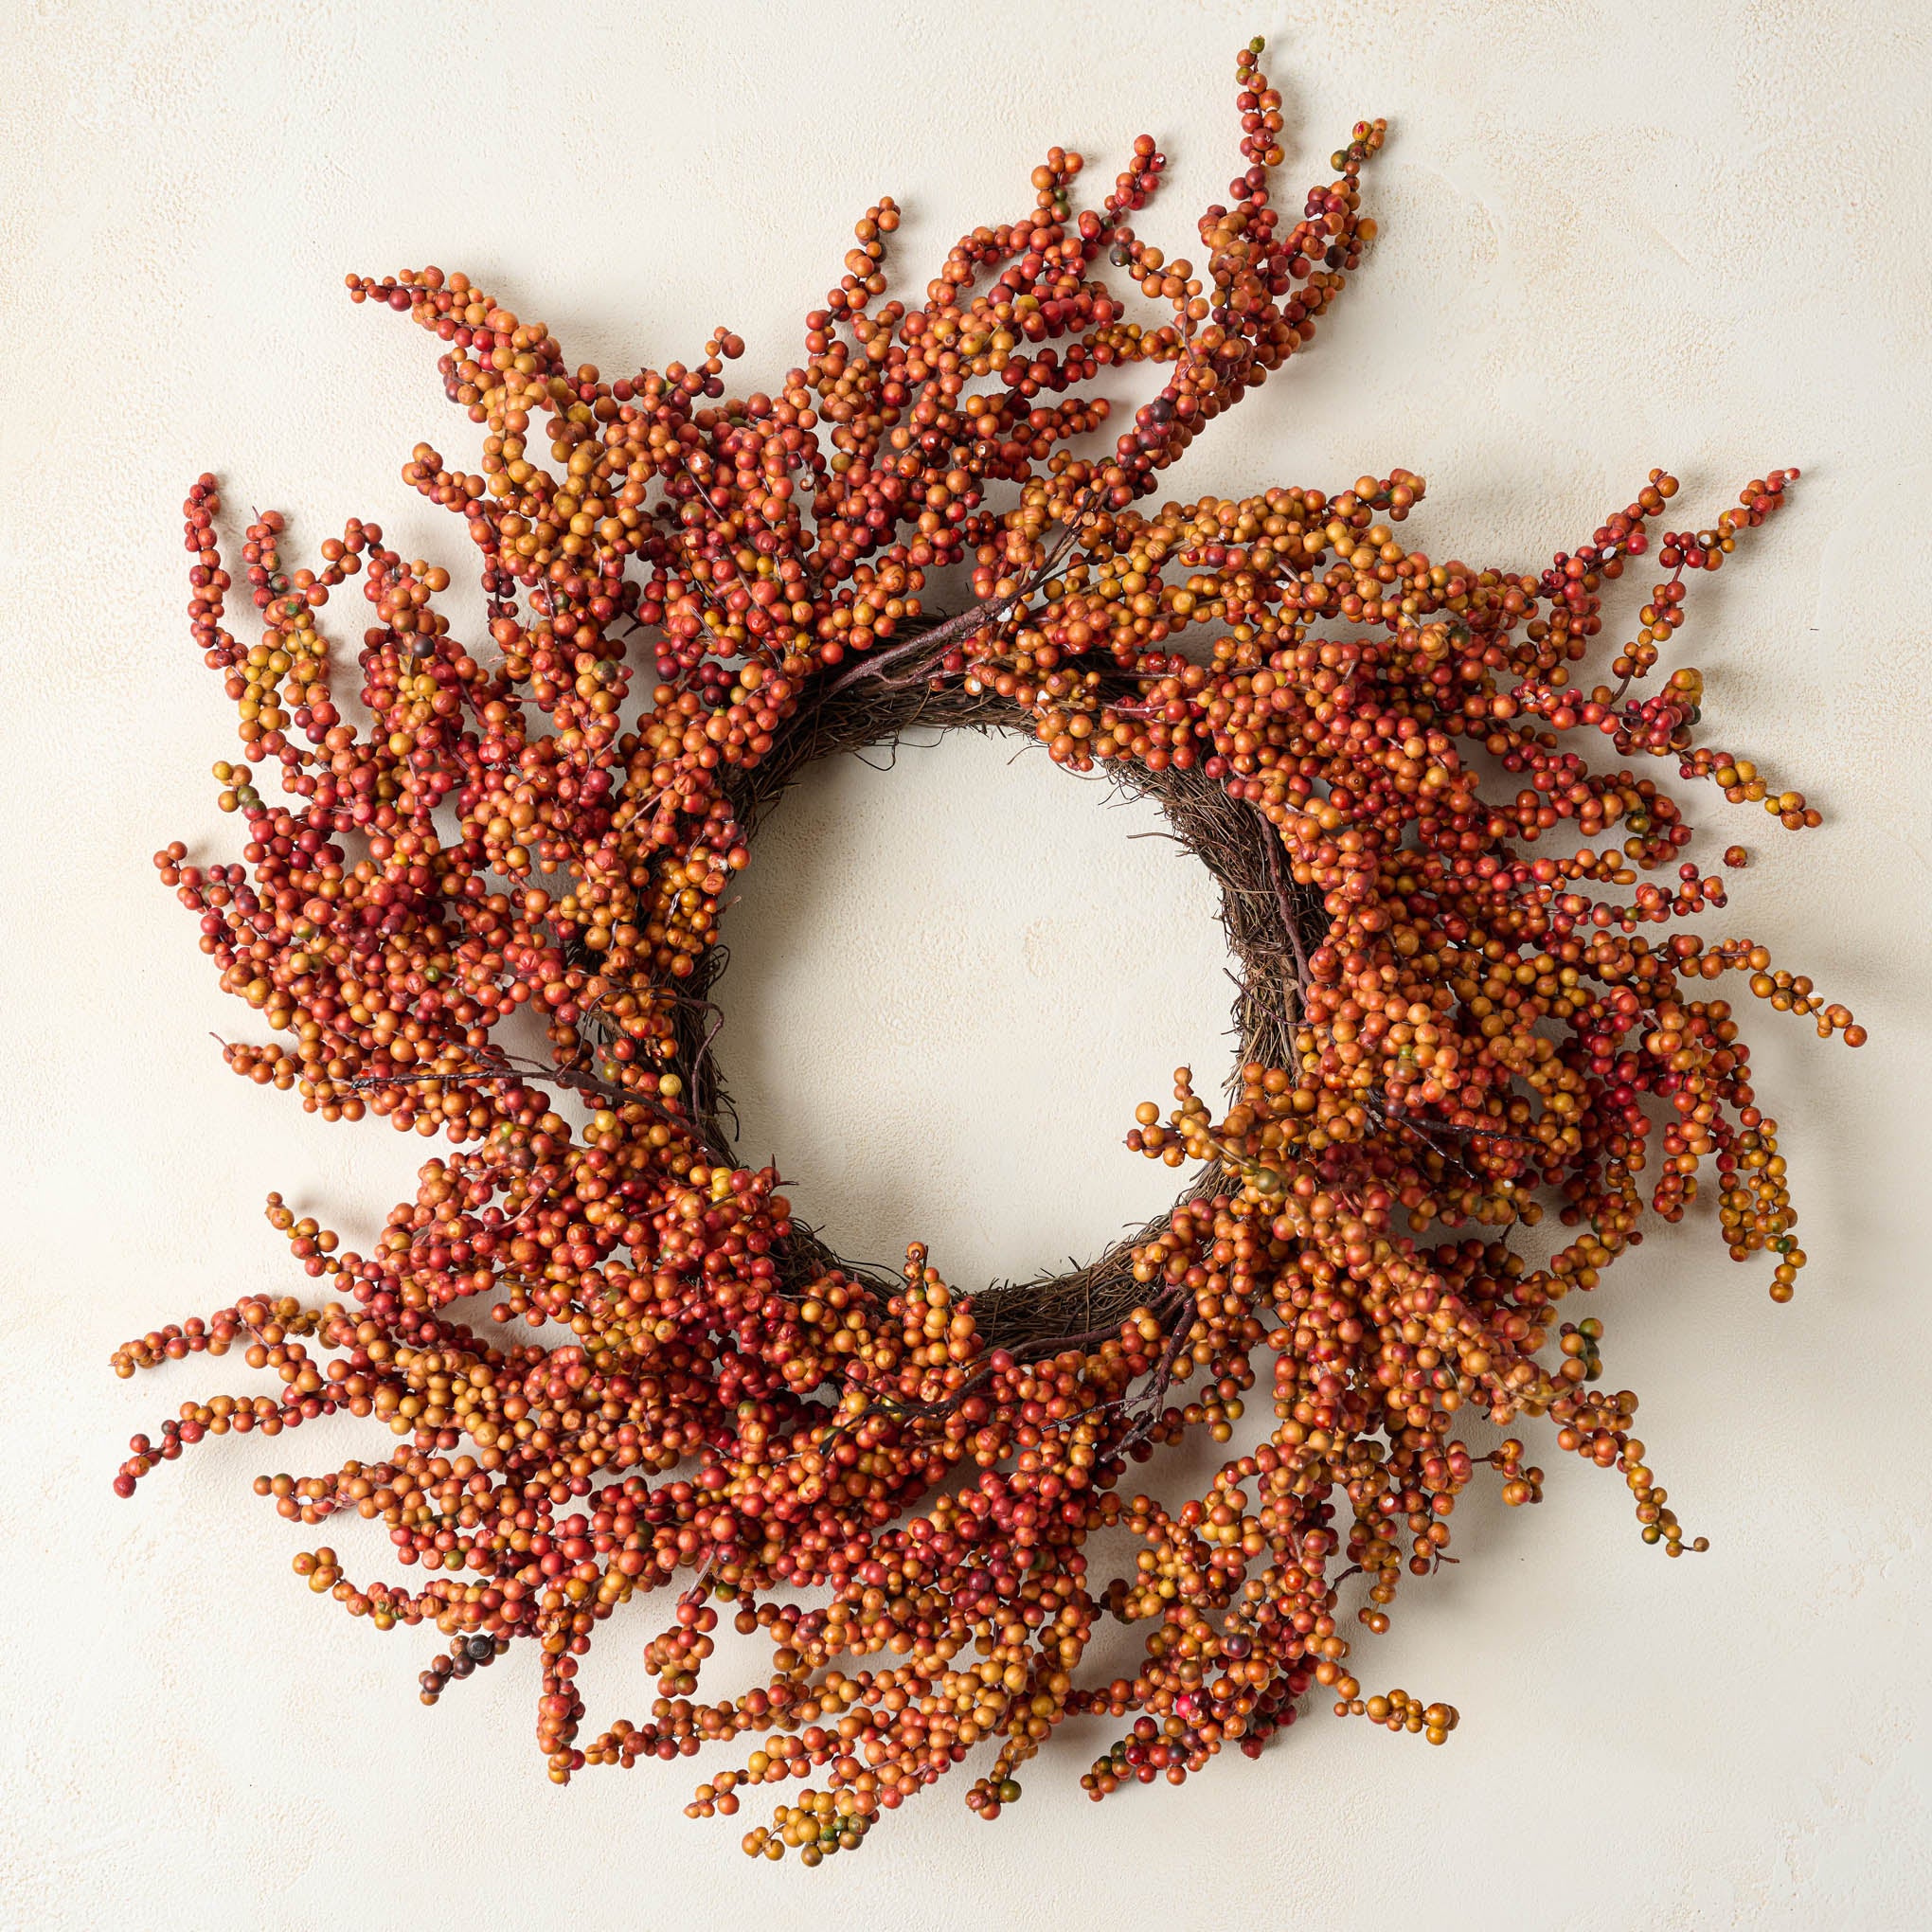 Fall Berry Wreath On sale for $51.20, discounted from $64.00